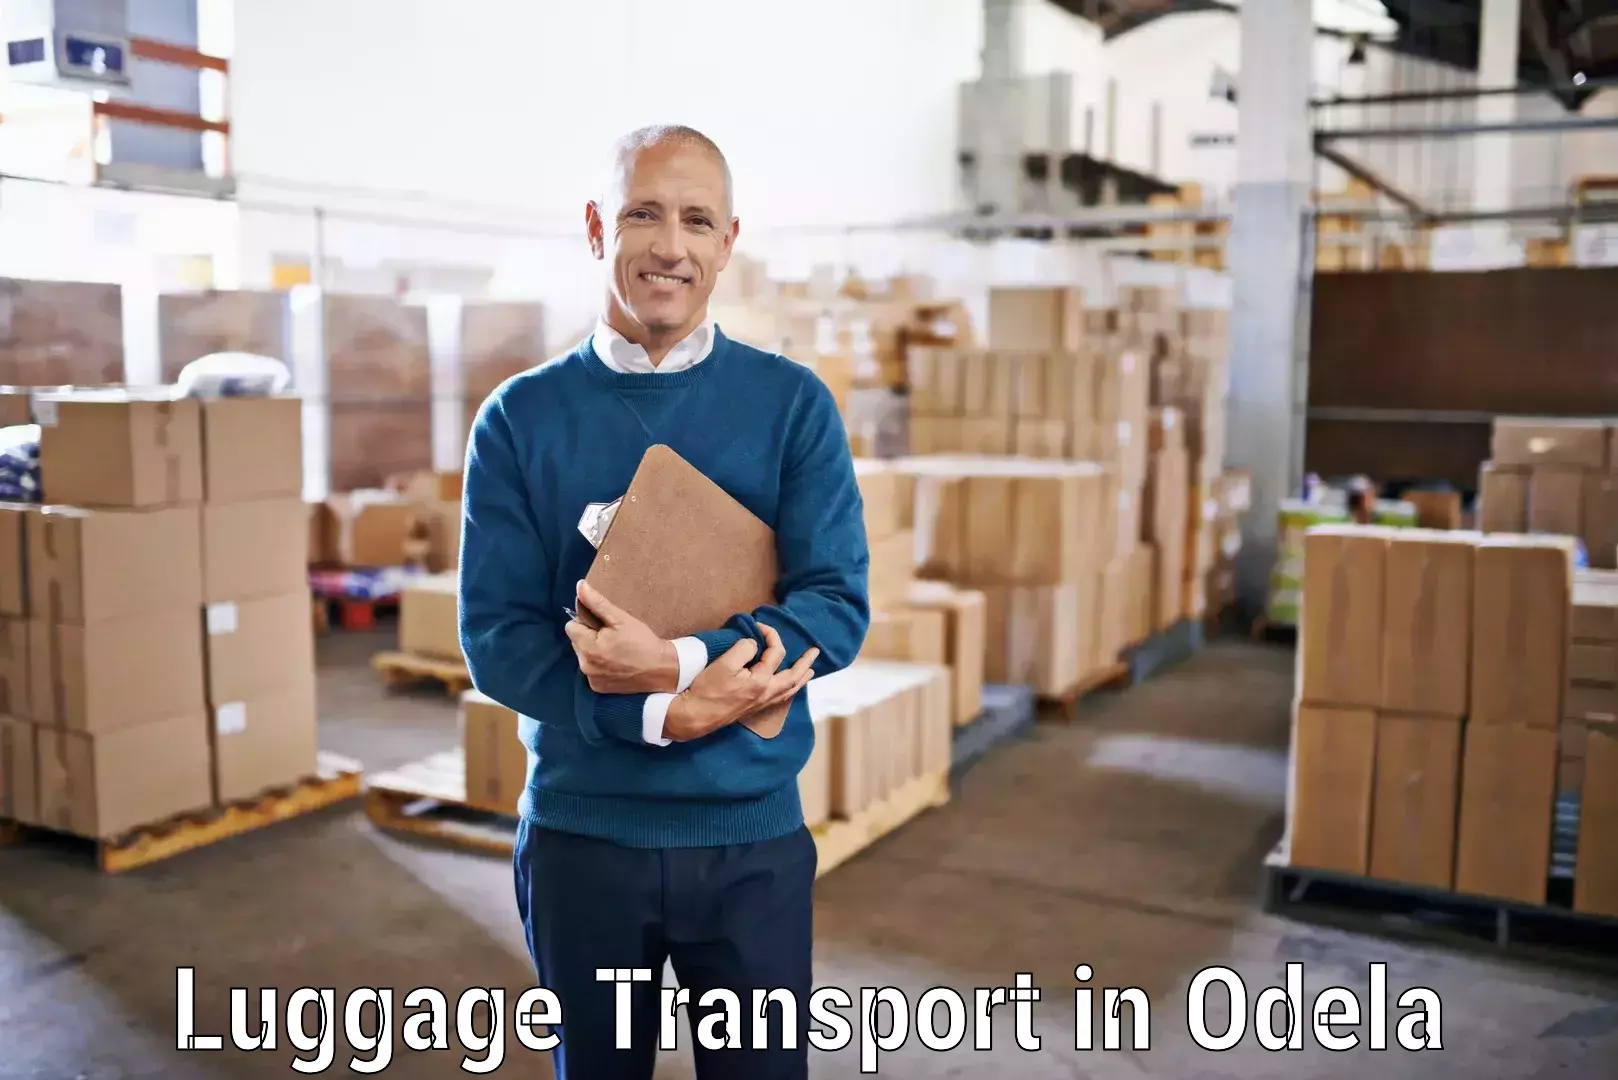 Luggage shipping rates in Odela